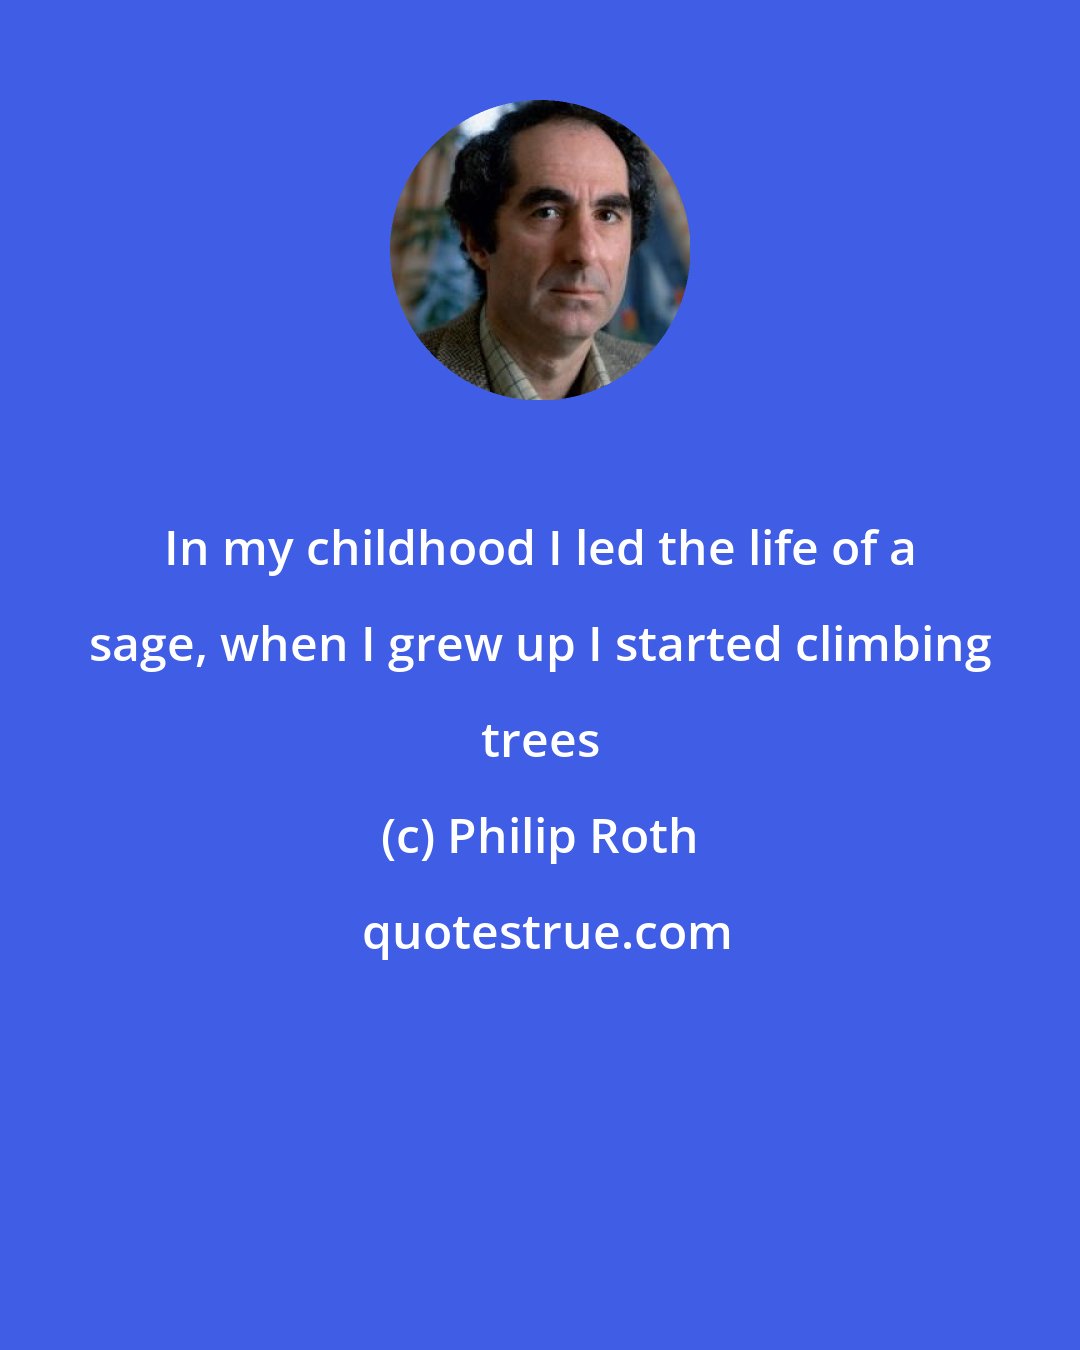 Philip Roth: In my childhood I led the life of a sage, when I grew up I started climbing trees